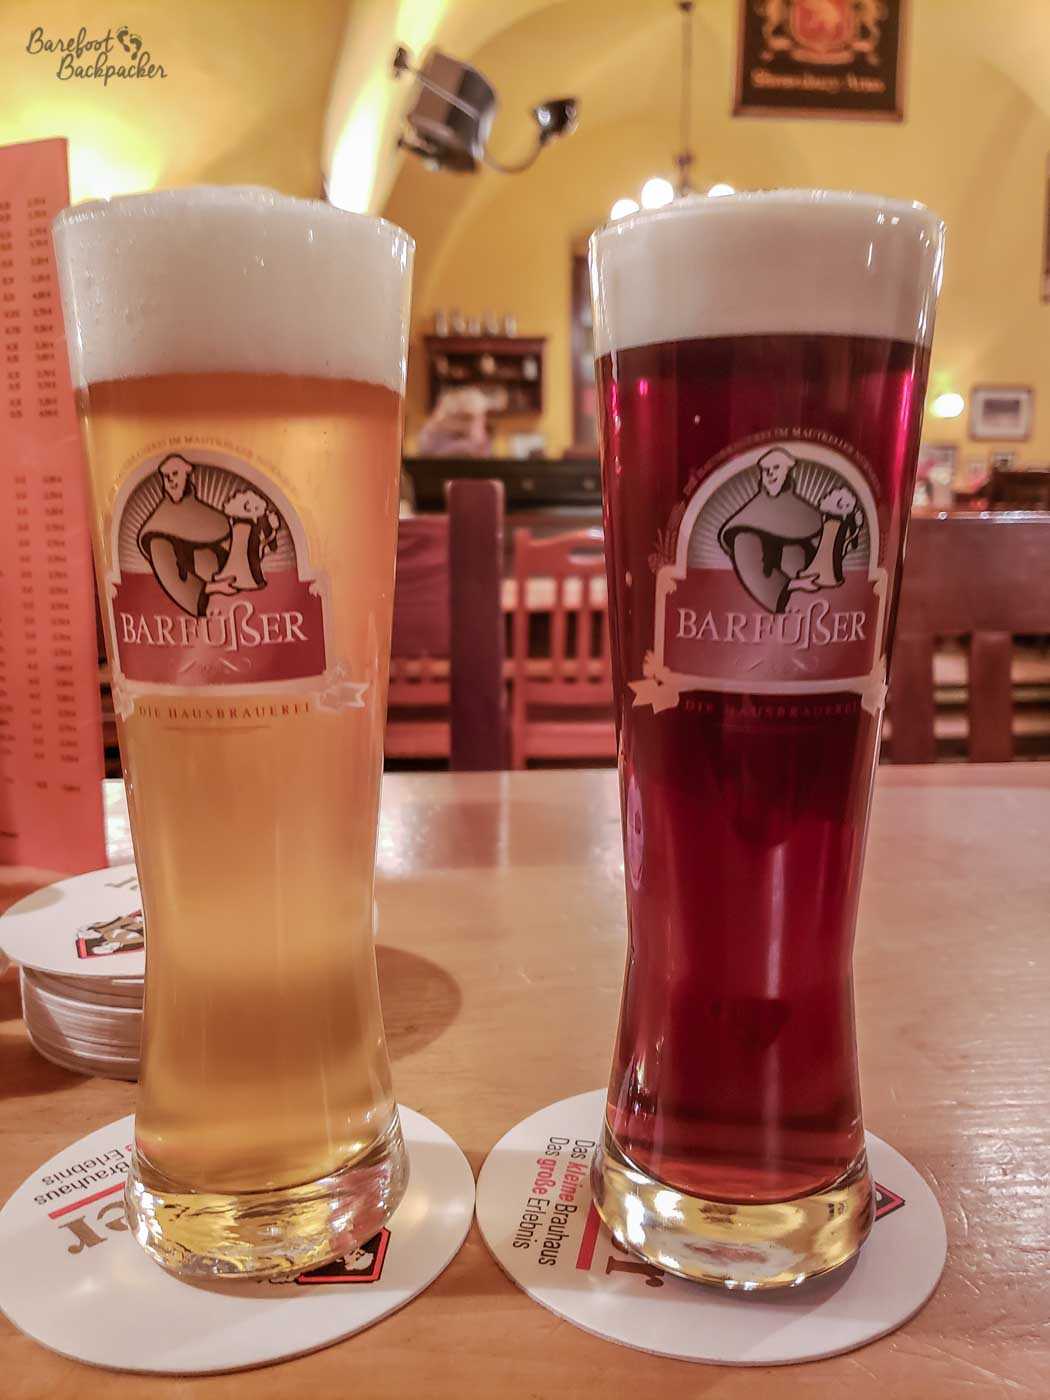 Inside the barfusser brewpub, Nuremberg. There are two branded glasses on the table, etched with an image of a monk – the one on the left has a blonde beer, the one on the right has a darker, more red-looking beer.